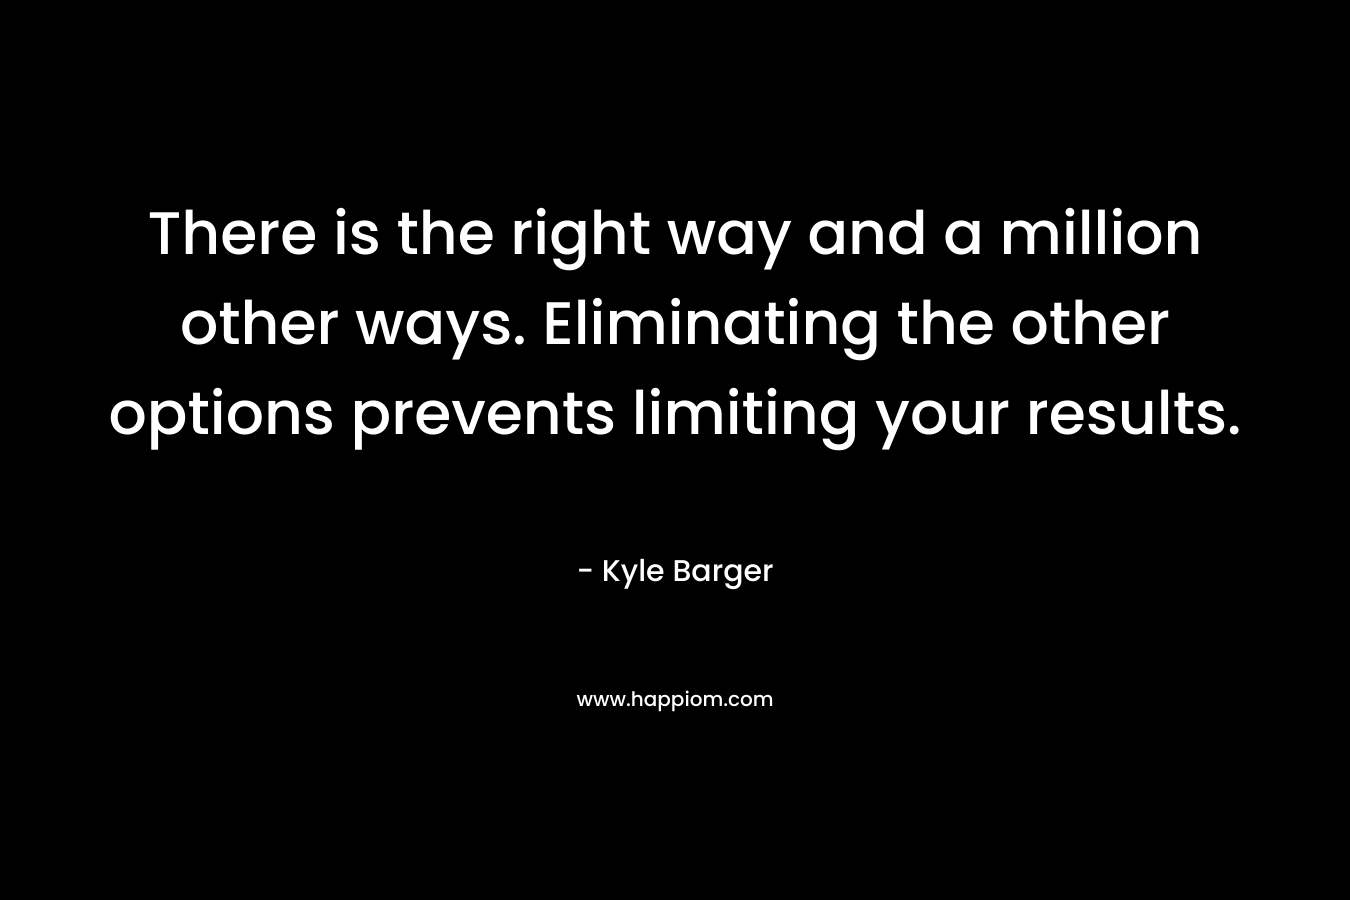 There is the right way and a million other ways. Eliminating the other options prevents limiting your results.